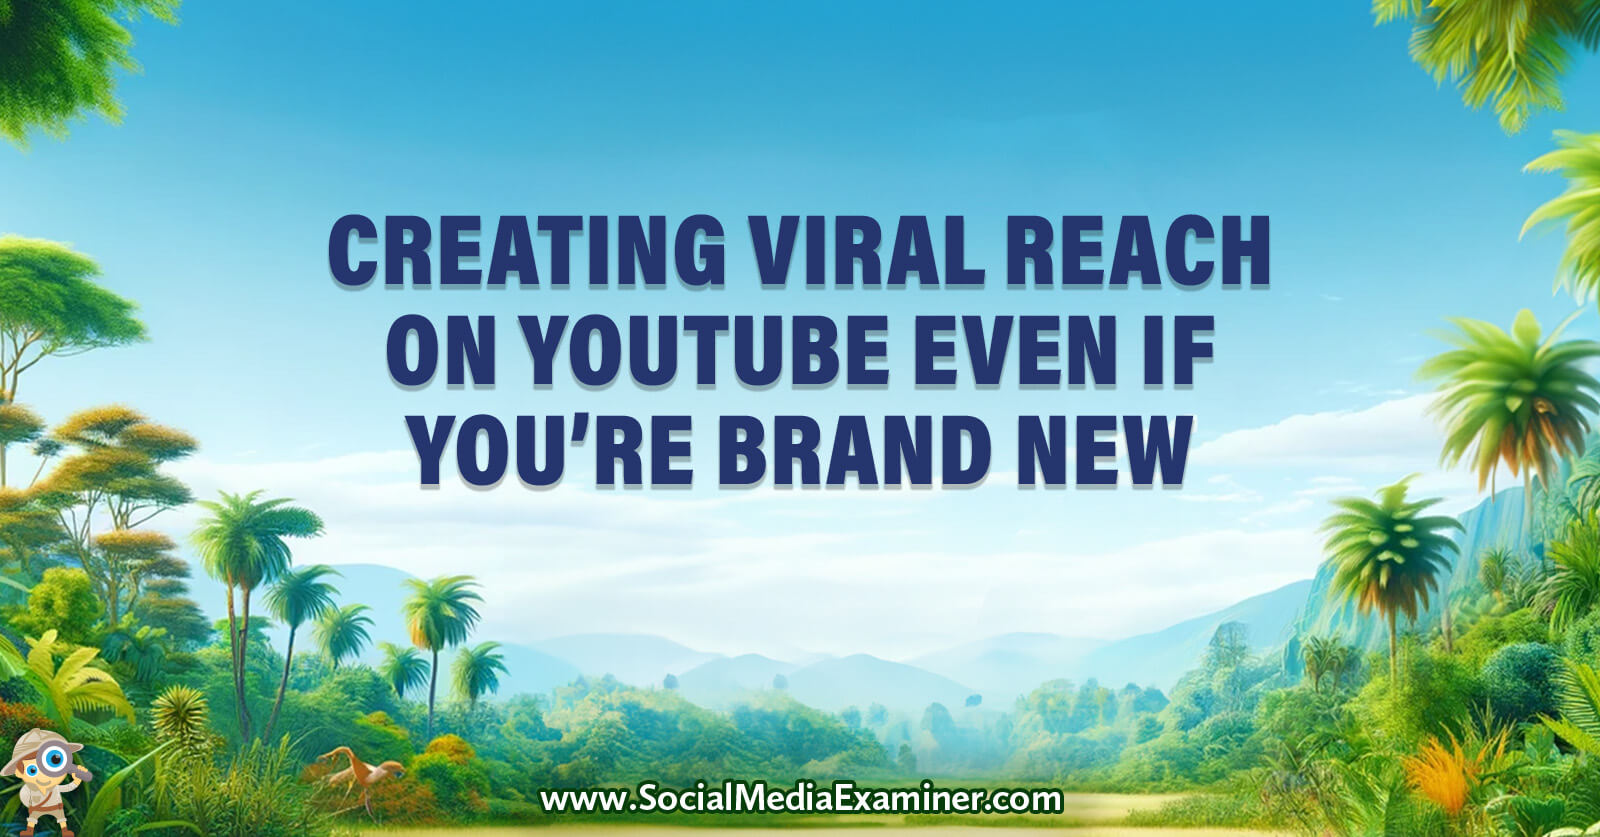 Creating Viral Reach on YouTube Even if You’re Brand New by Social Media Examiner